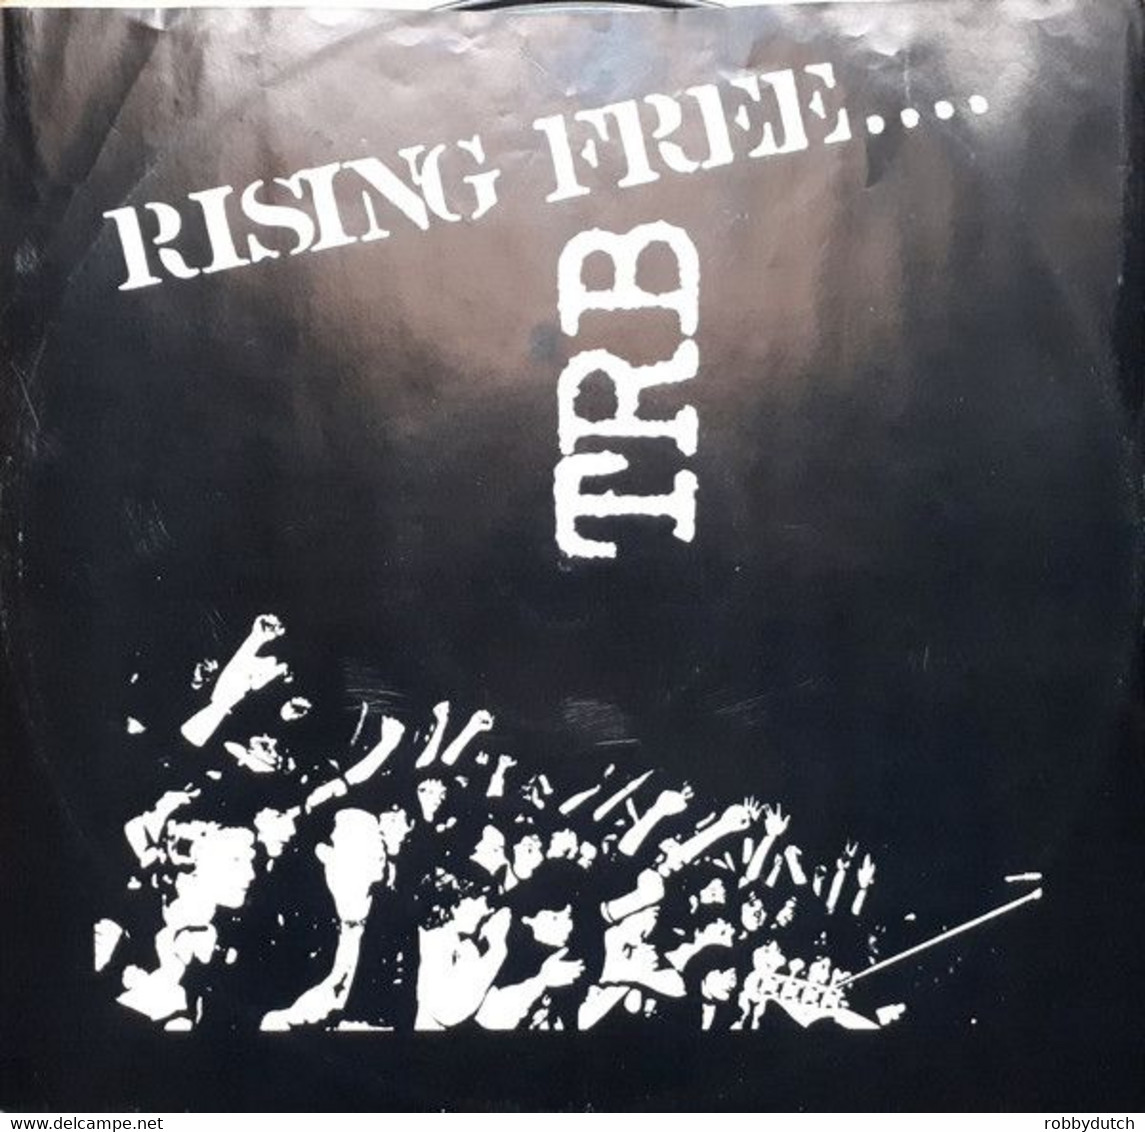 * 2LP * TOM ROBINSON BAND (TRB) - POWER IN THE DARKNESS ( Canada 1978)